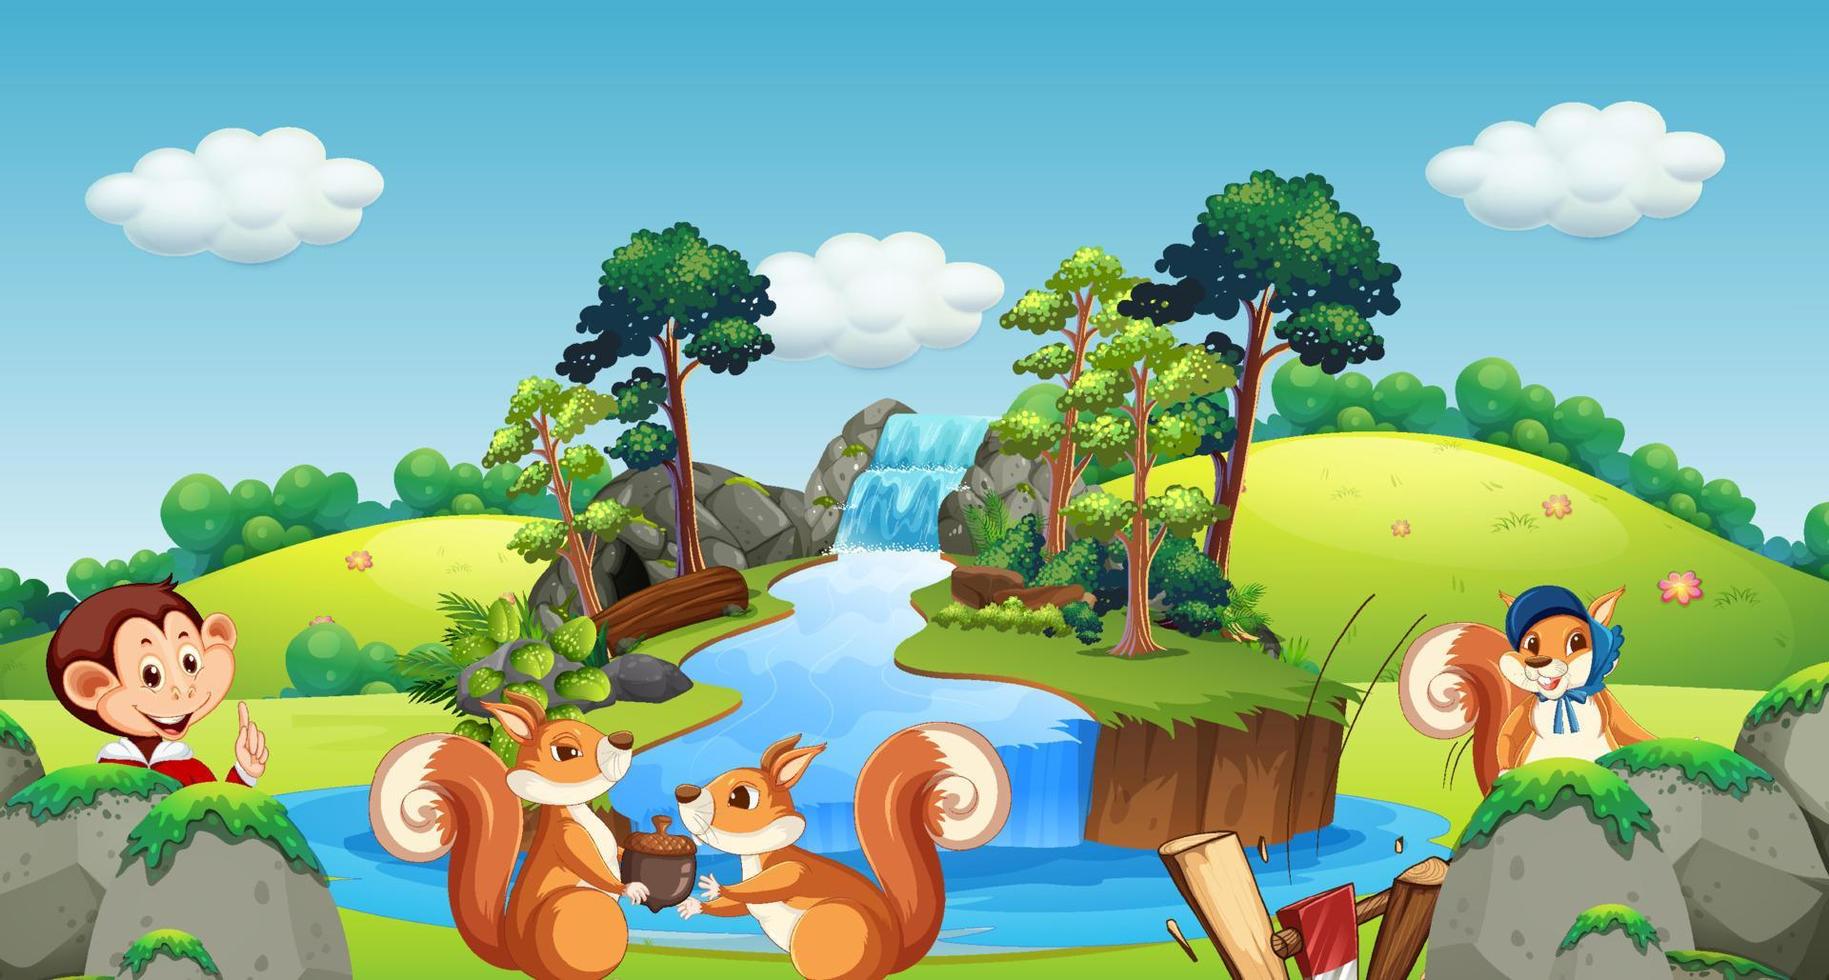 Scene with squirrels and monkey by waterfall vector